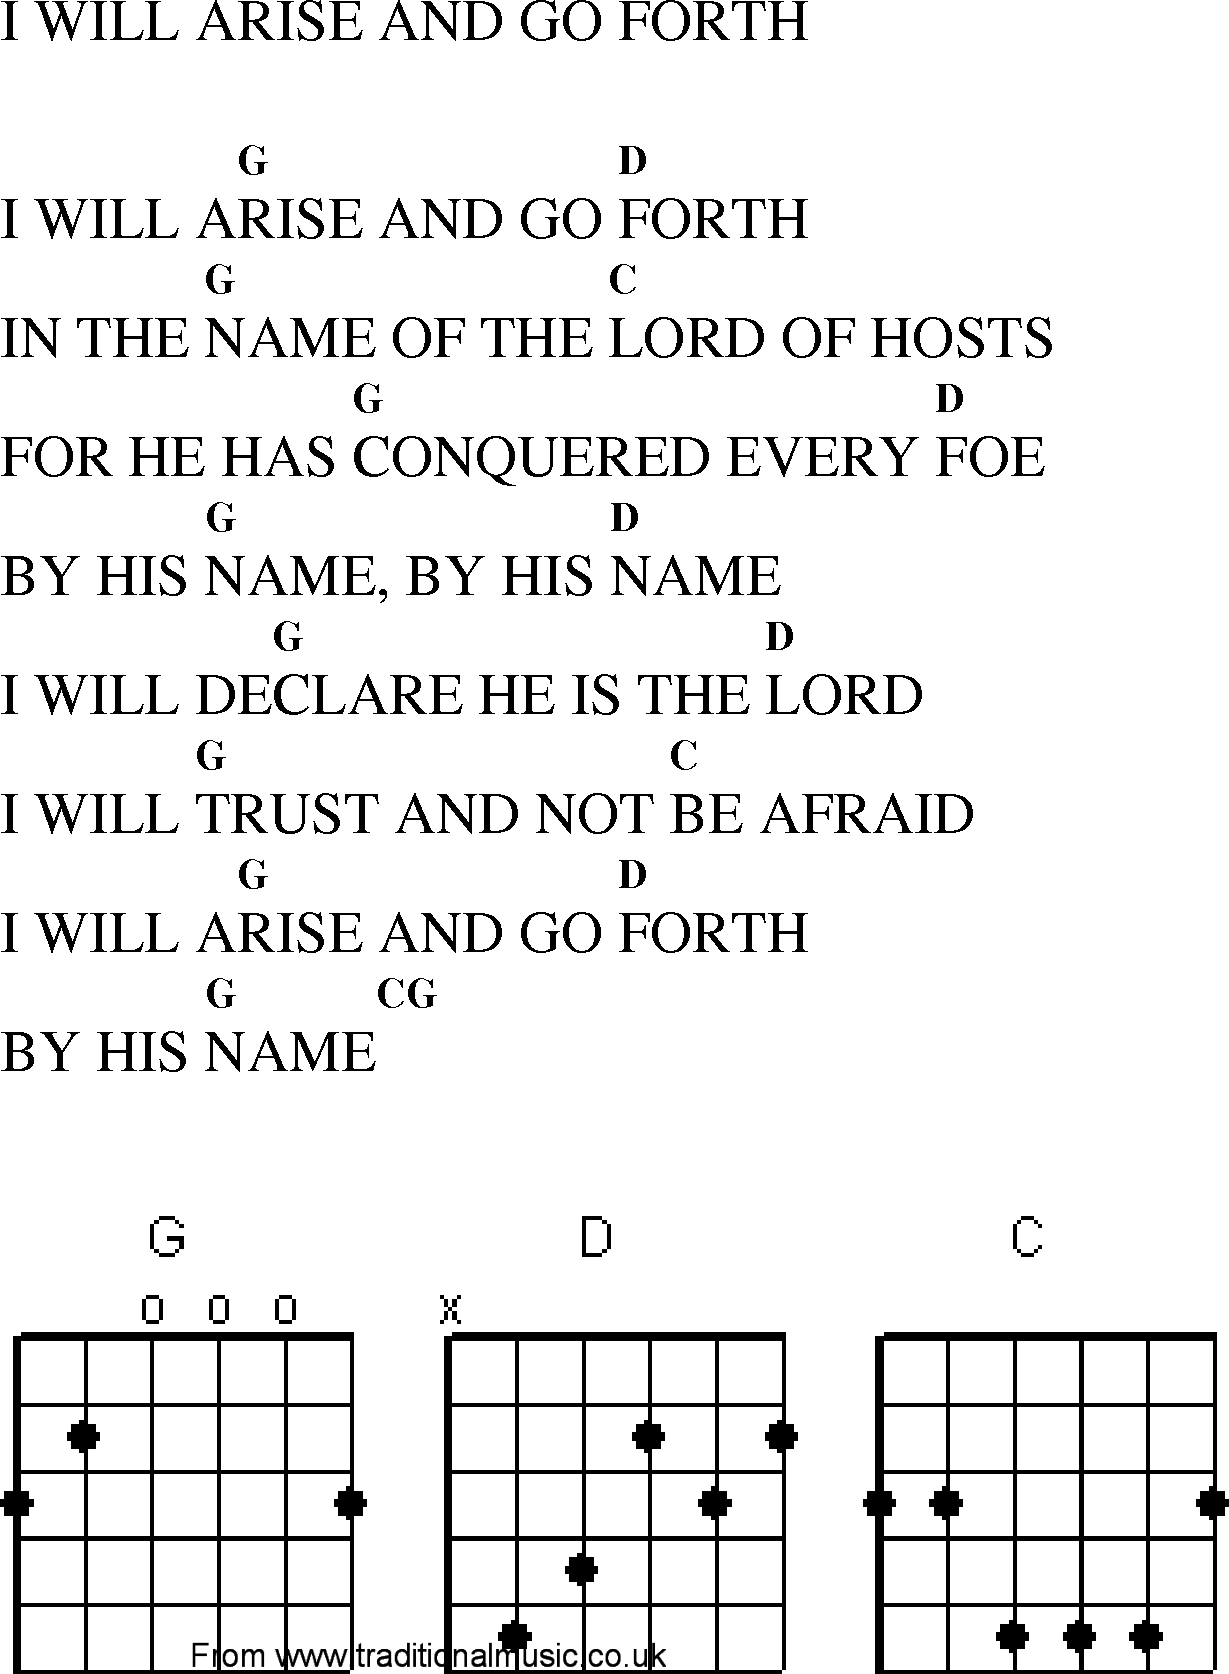 Gospel Song: i_will_arise_and_go_forth, lyrics and chords.